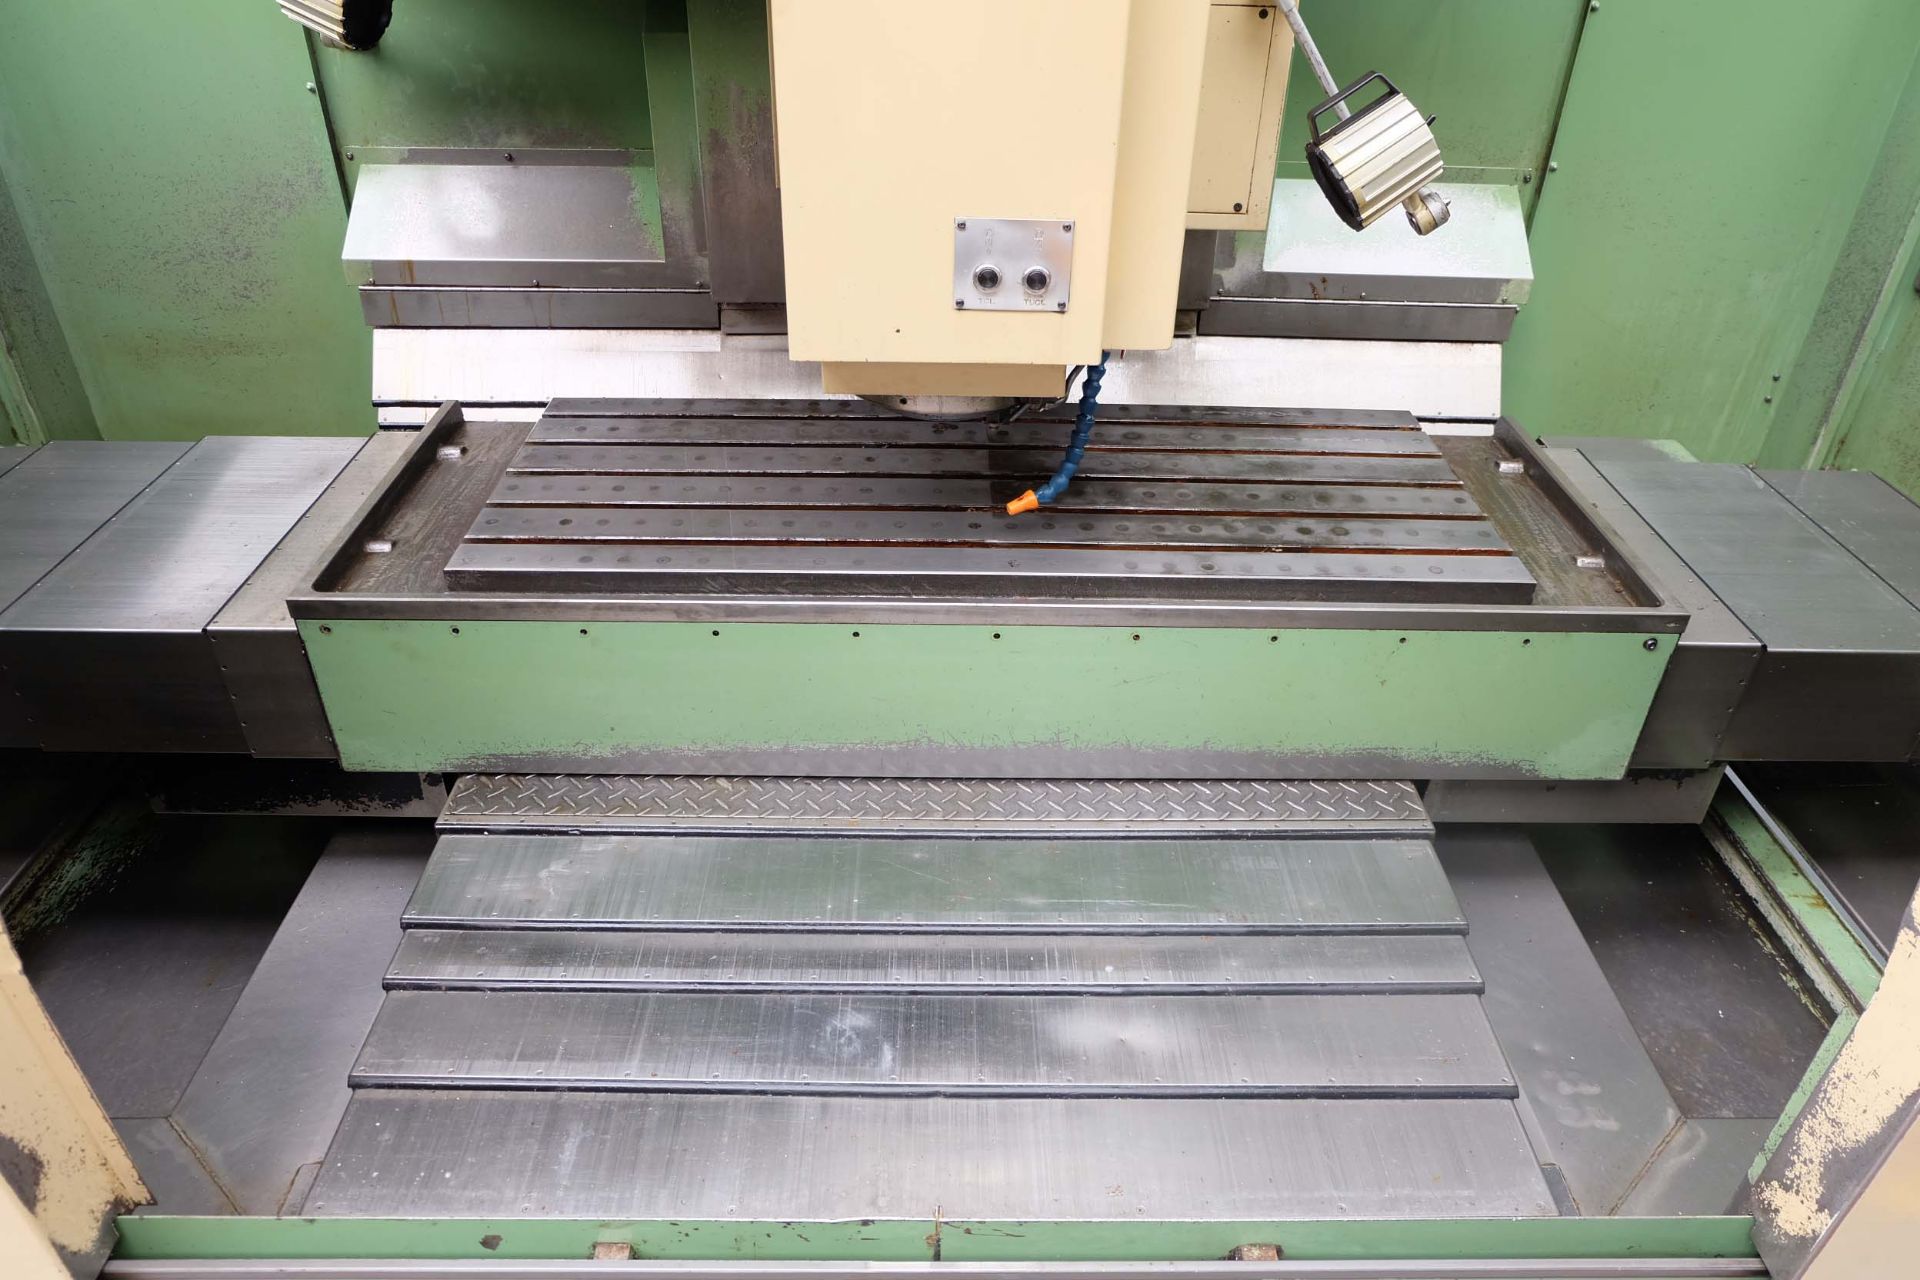 Mori-Seiki MV55/40 Vertical Machining Centre With Fanuc 10MA Control. Table Size: 1400 x 550mm. - Image 6 of 26